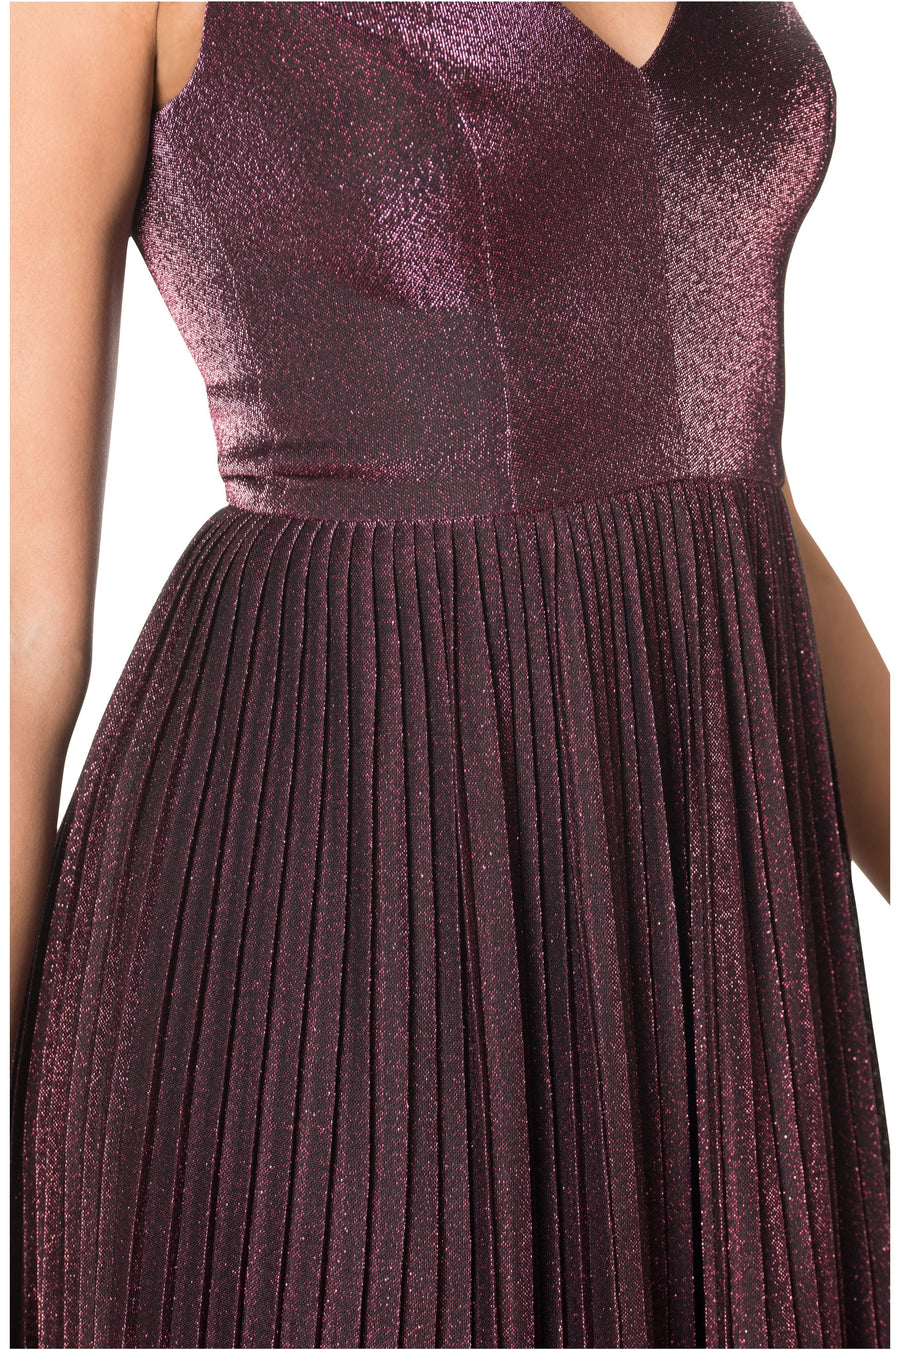 Haley Fuschia Fit And Flare Dress - Dress the Population